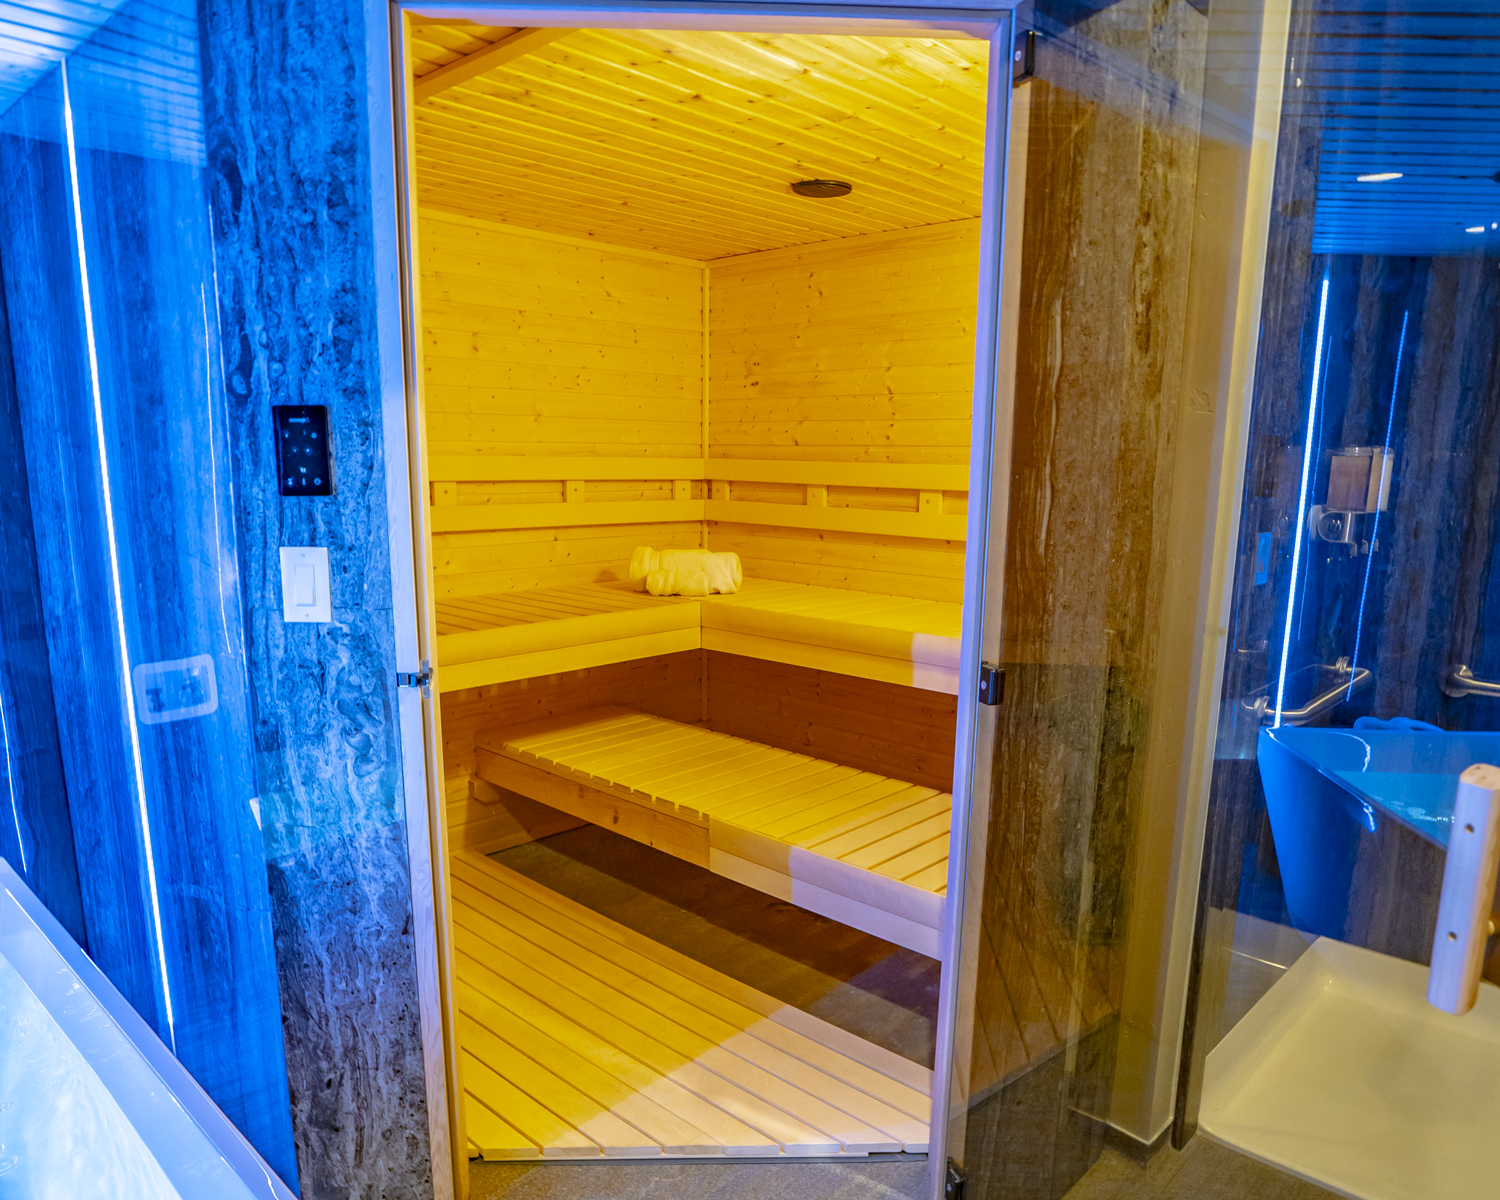 Contrast Therapy: The Benefits of Sauna and the Cold Plunge